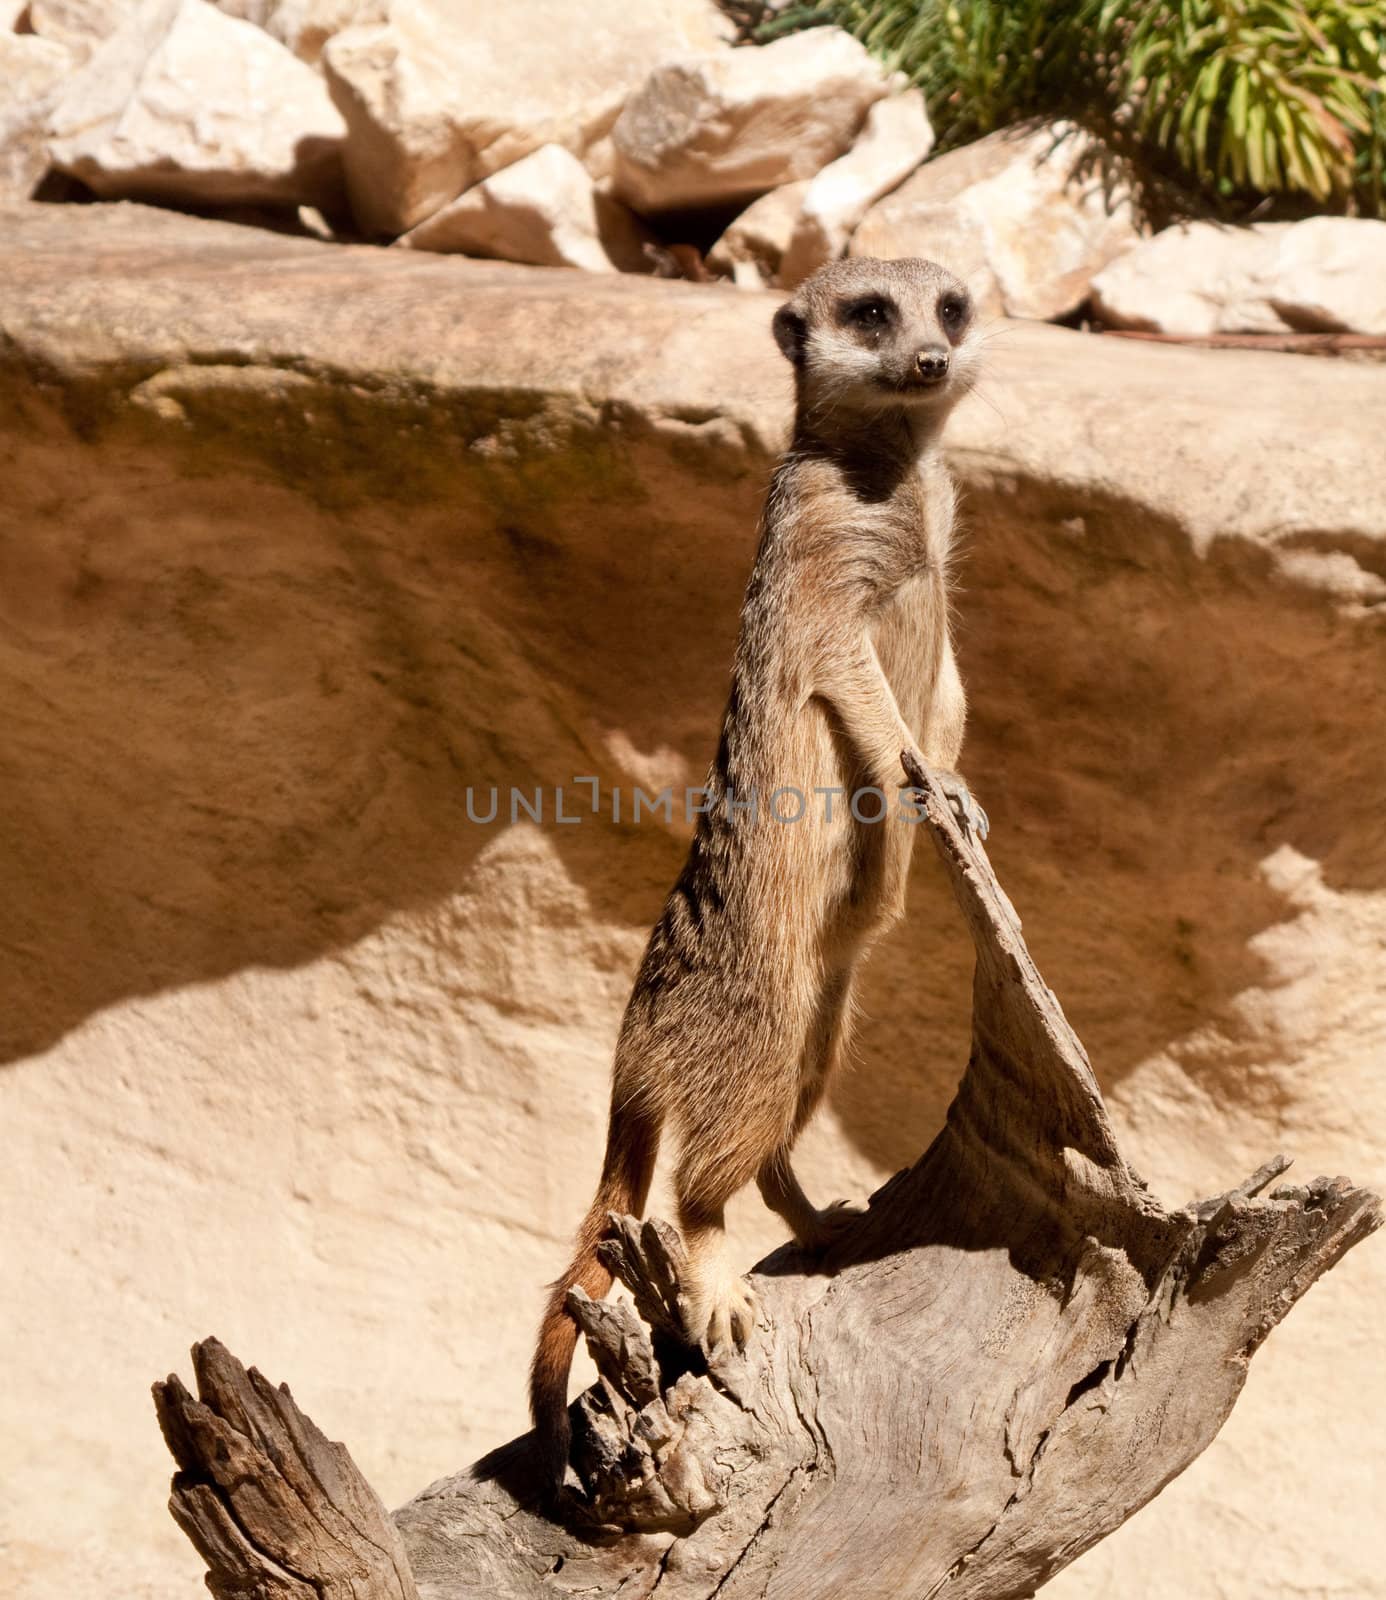 Upright meerkat standing on a rugged tree trunk at attention